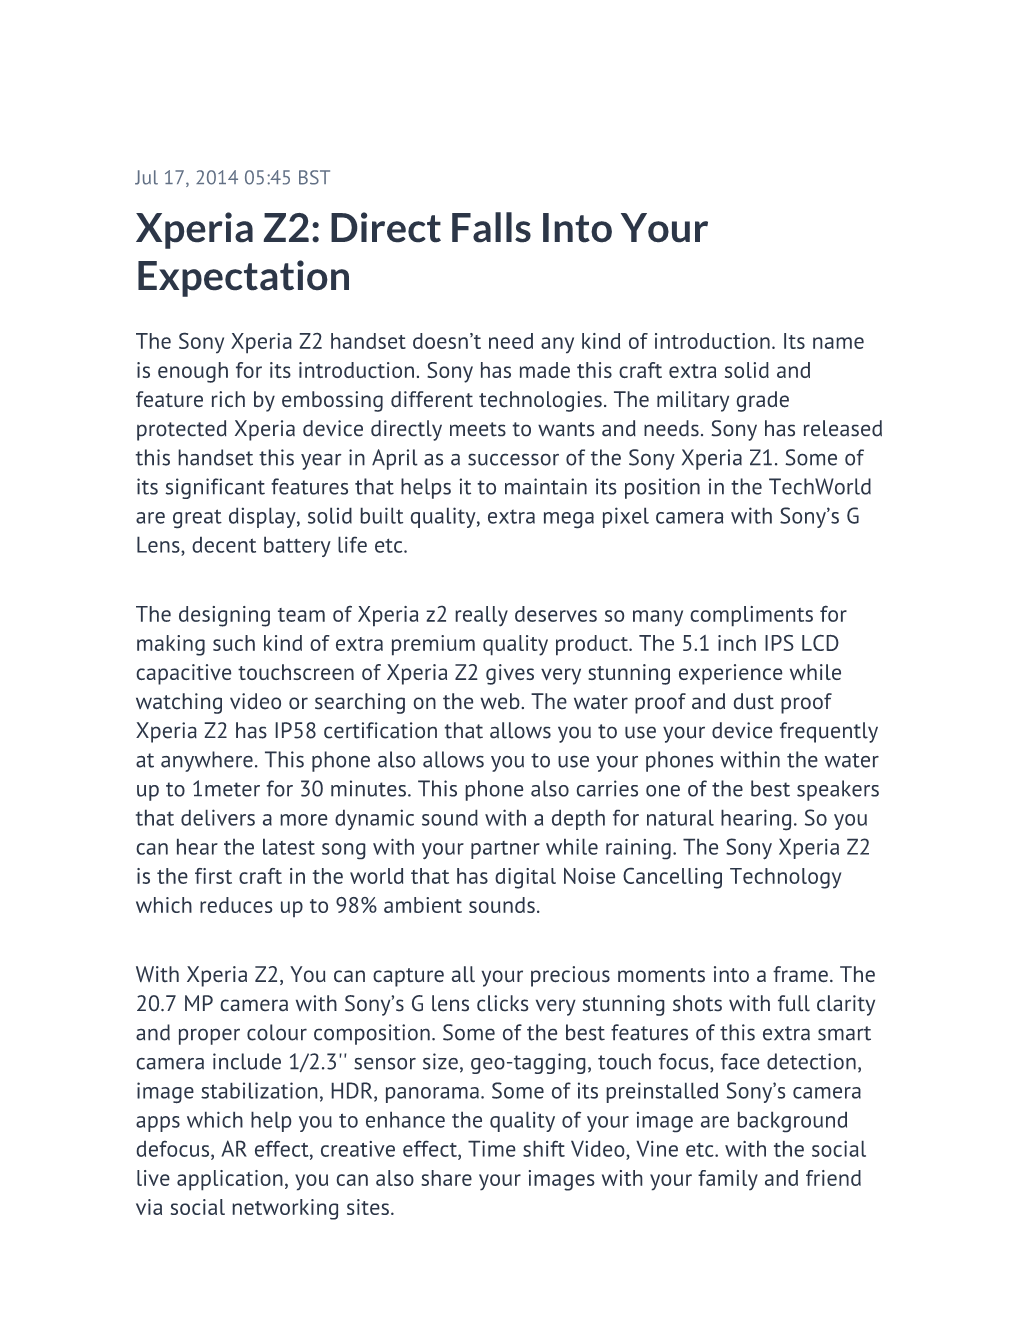 Xperia Z2: Direct Falls Into Your Expectation